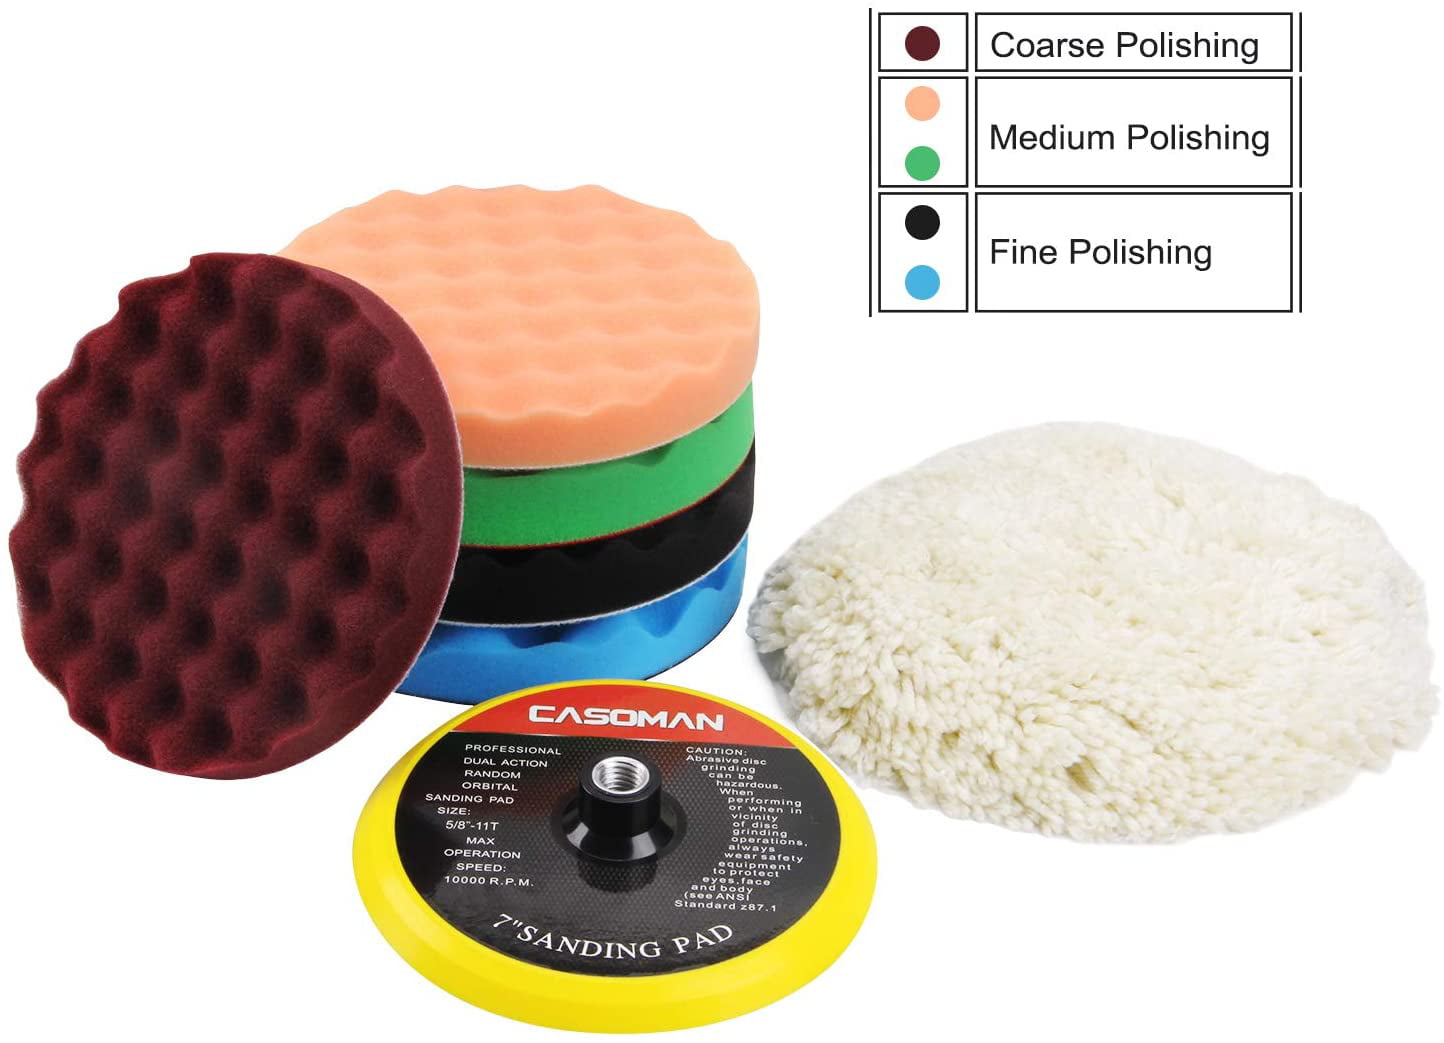 RS PRO 2x 115g Plastic Polishing Kit Containing 100 mm x 2-Section Stitched  Hard Buff, 100 mm x 50 mm Loose Fold Soft